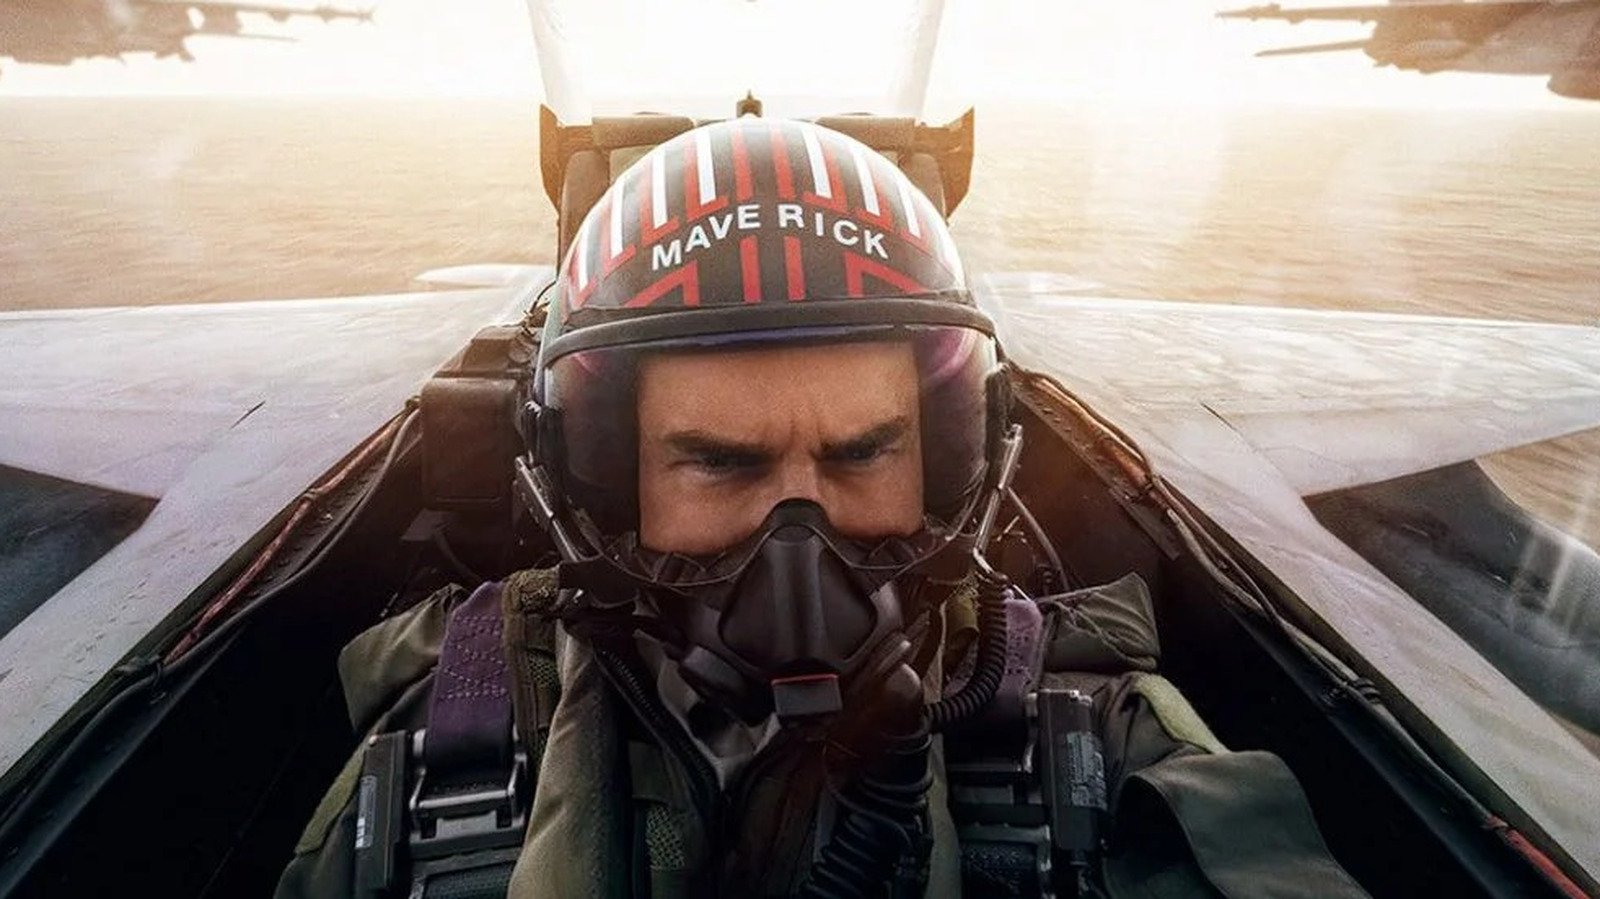 What Is the Real Story of 'Top Gun'?, At the Smithsonian